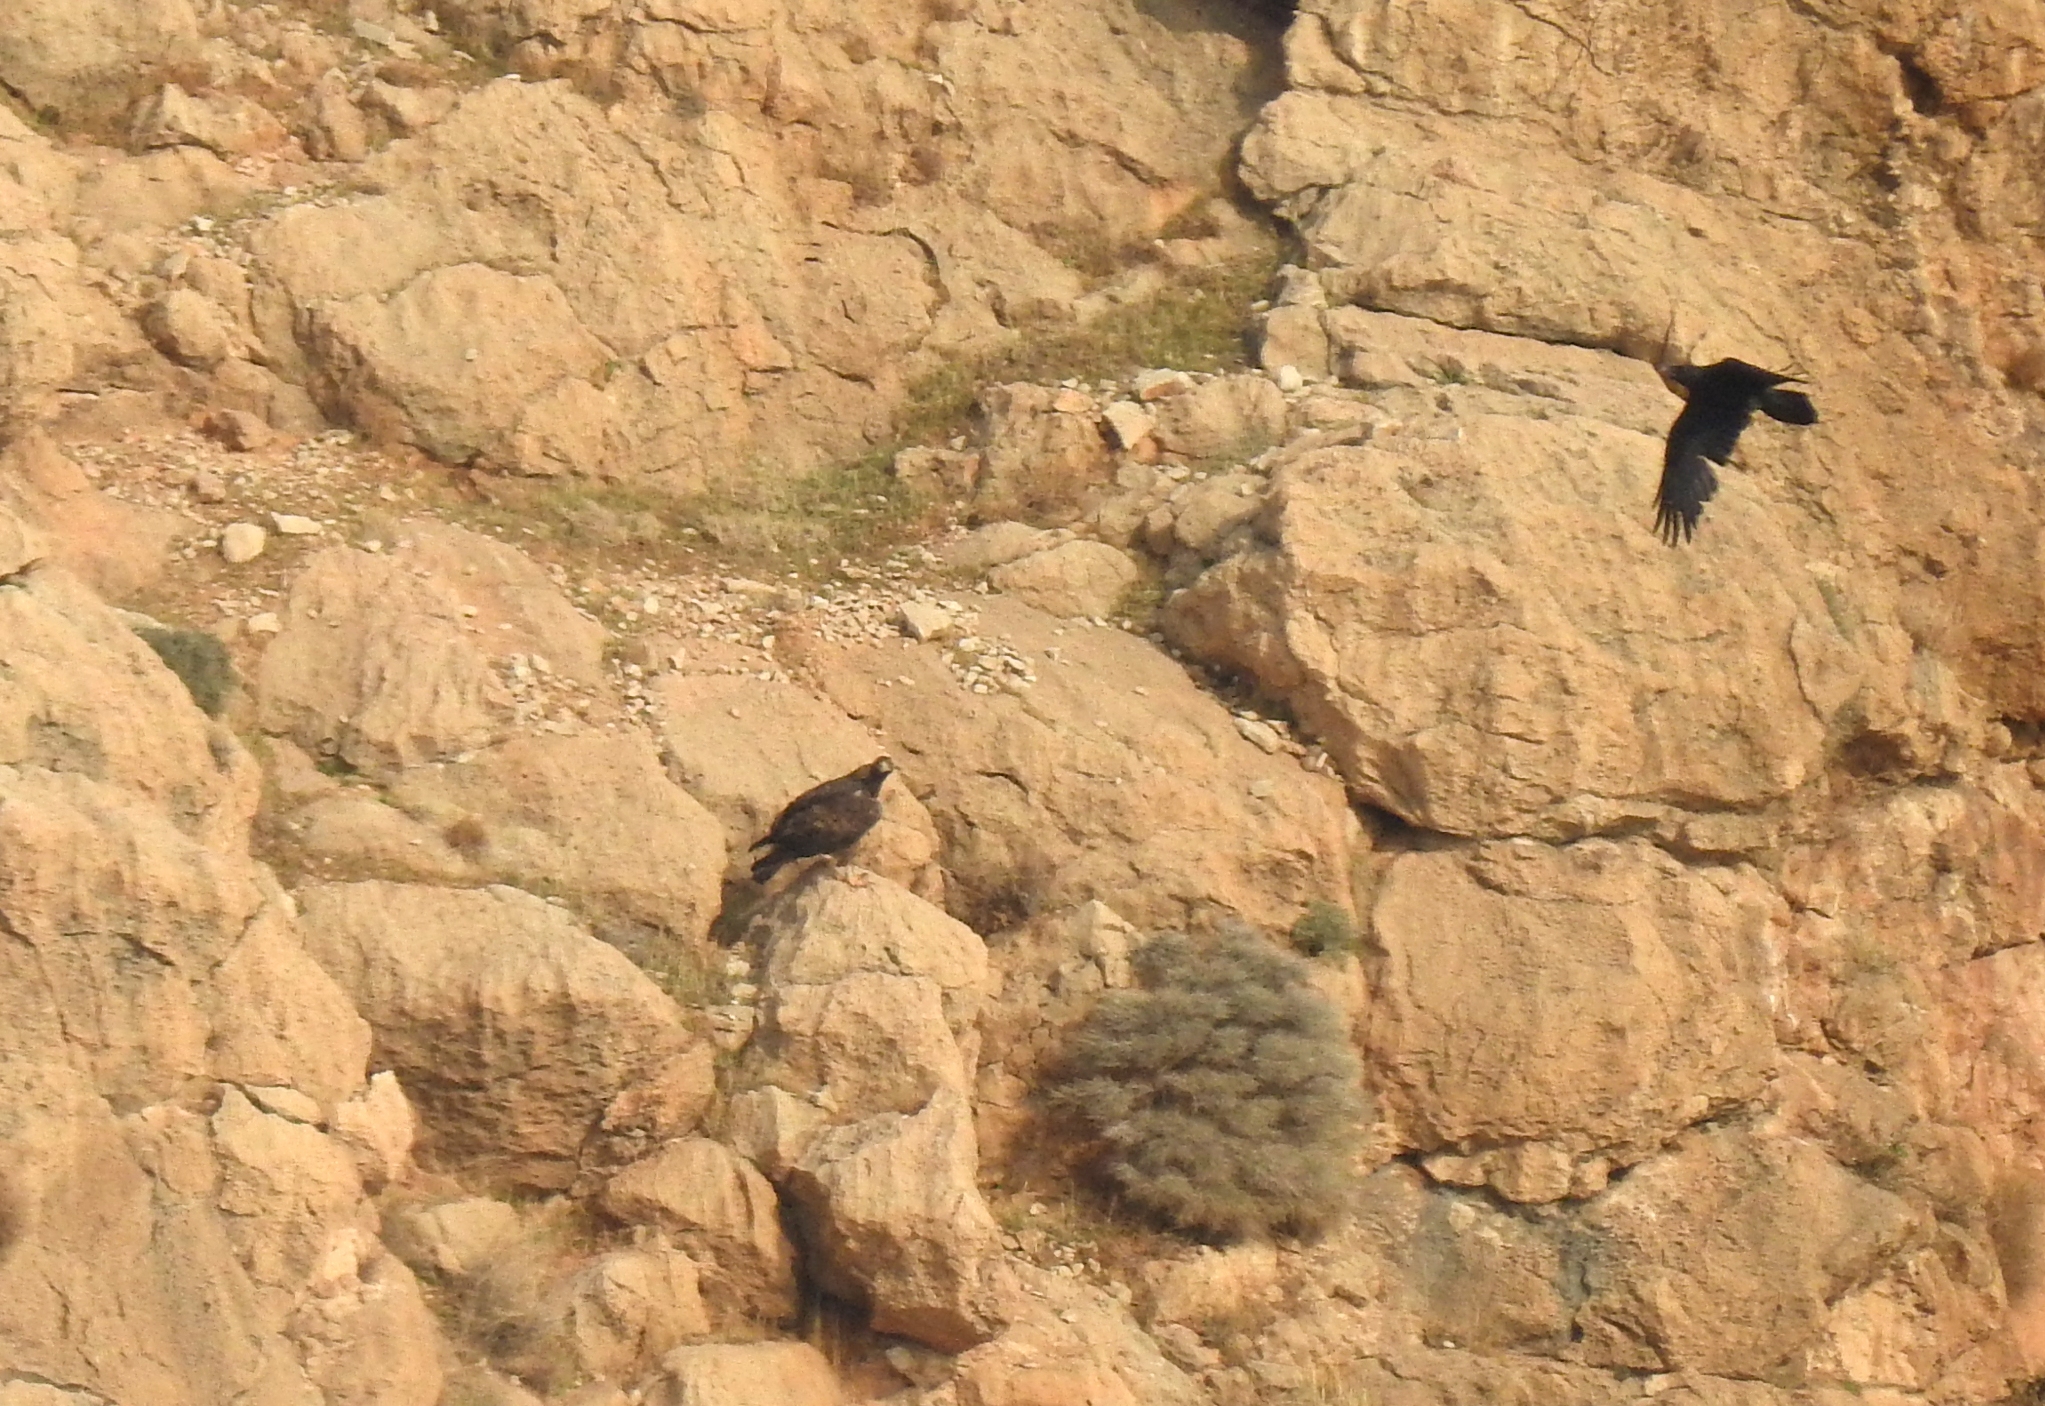 Golden eagle being mobbed by a common raven